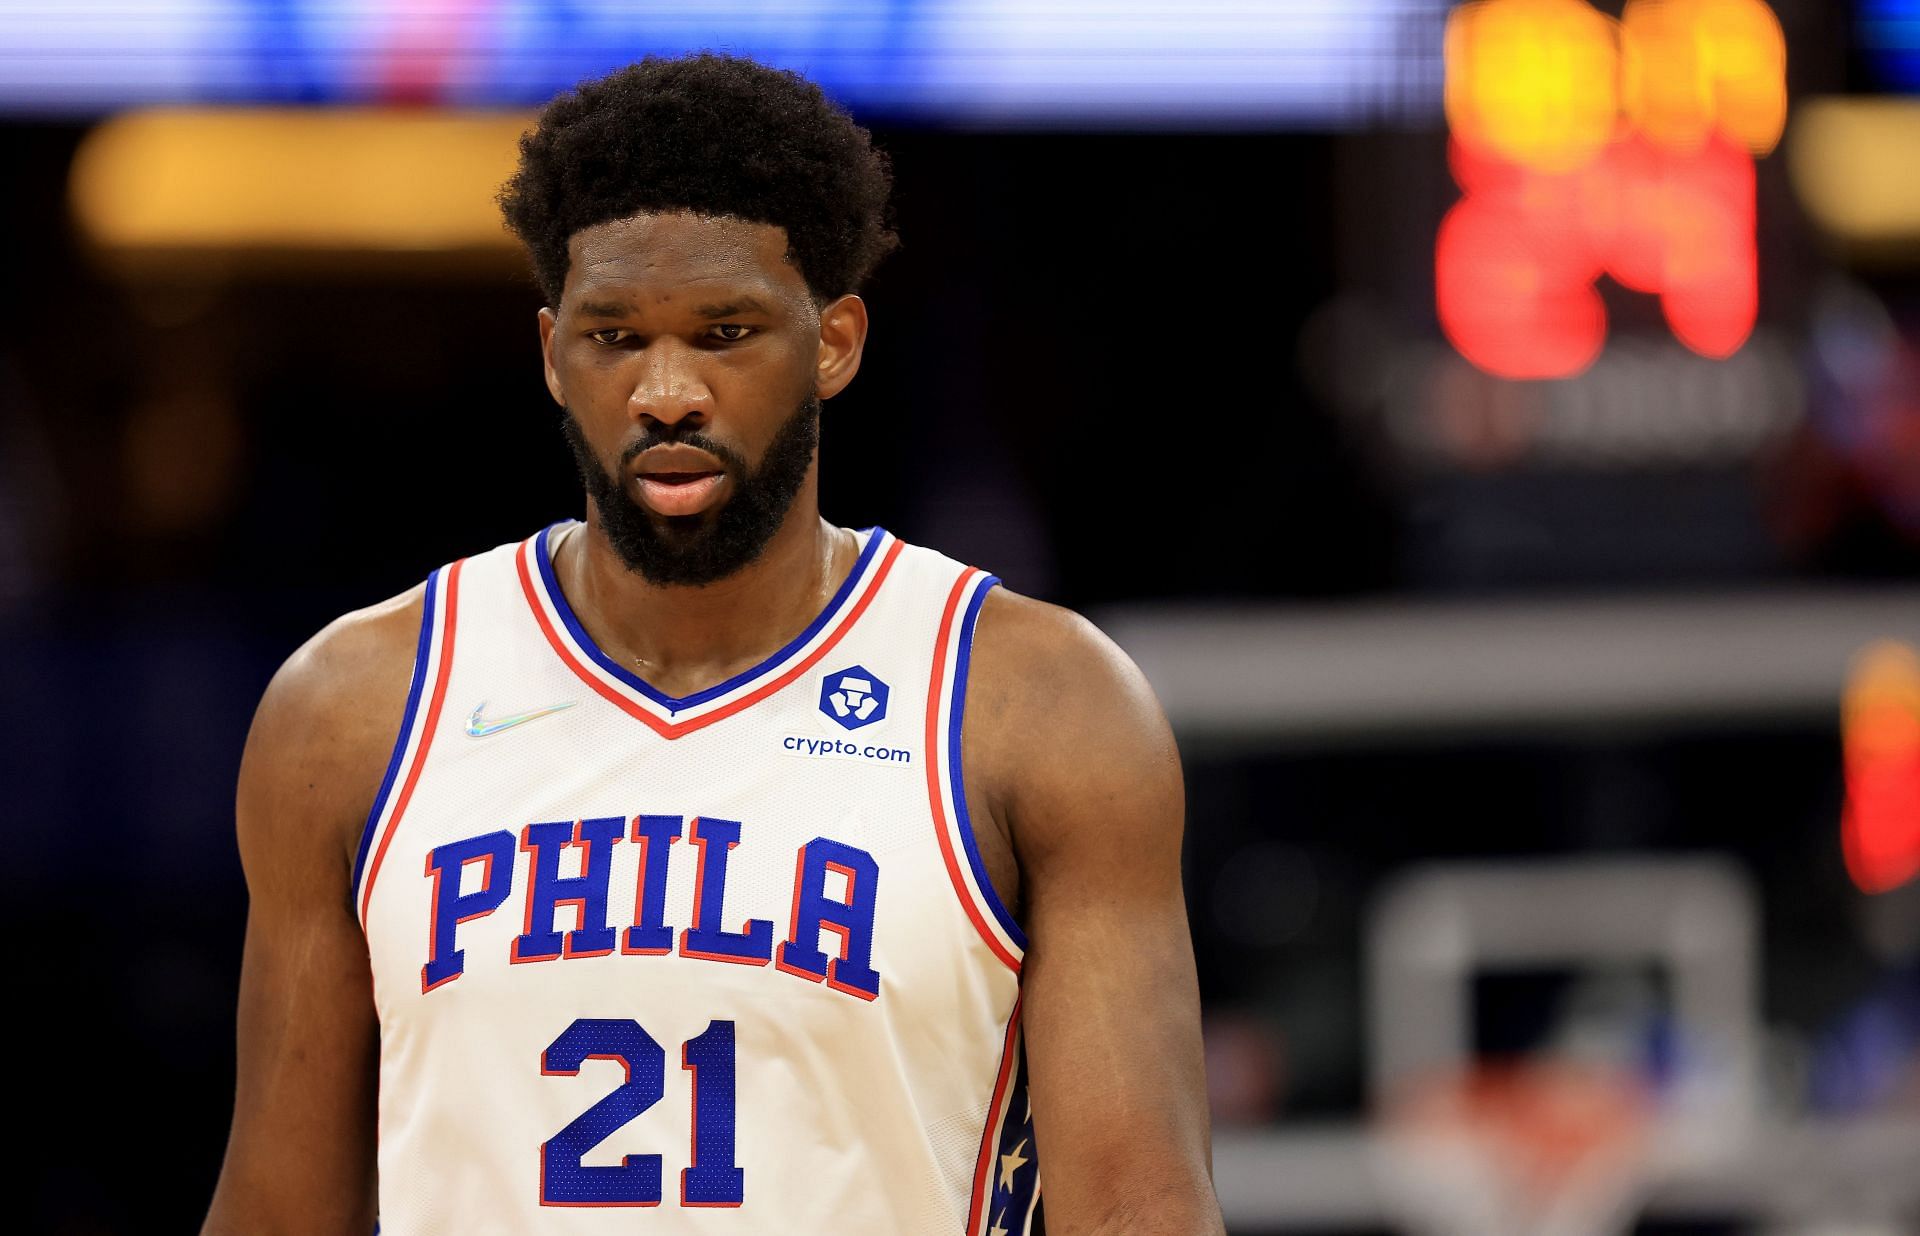 Philadelphia 76ers superstar big man Joel Embiid is heating up in the Defensive Player of the Year race.